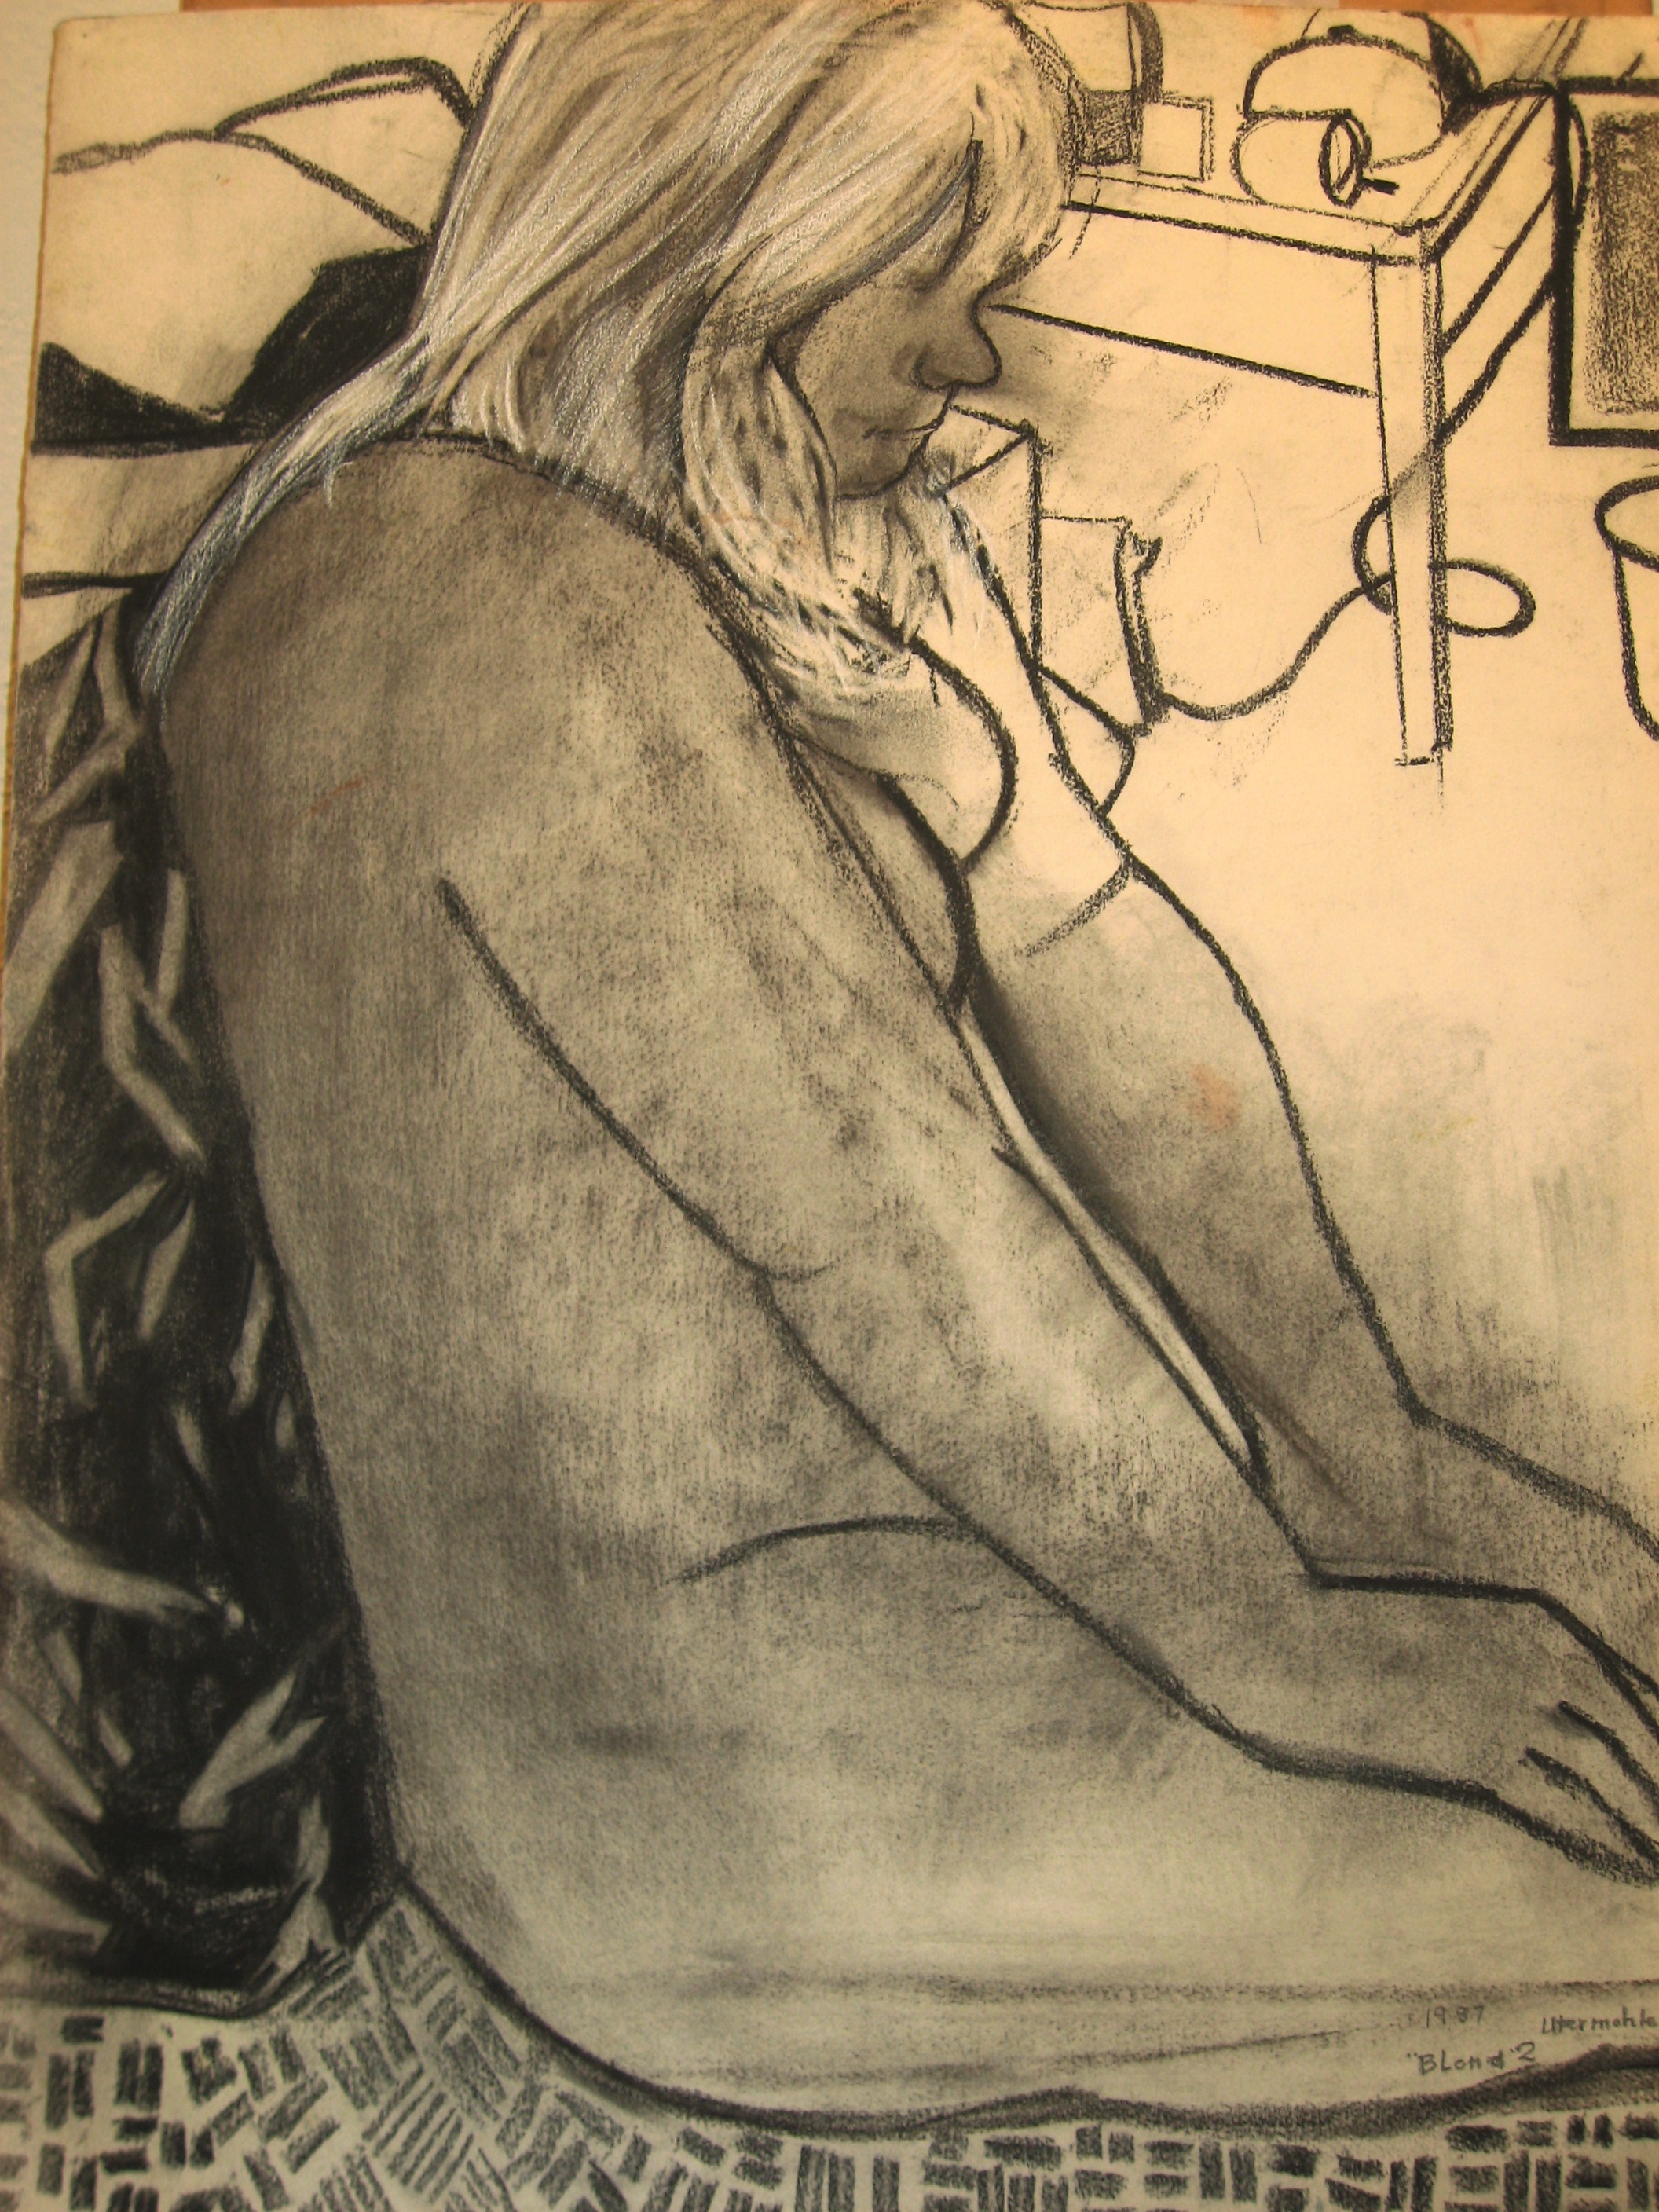  "Blond 2," 1987, charcoal, 30x22 in. 